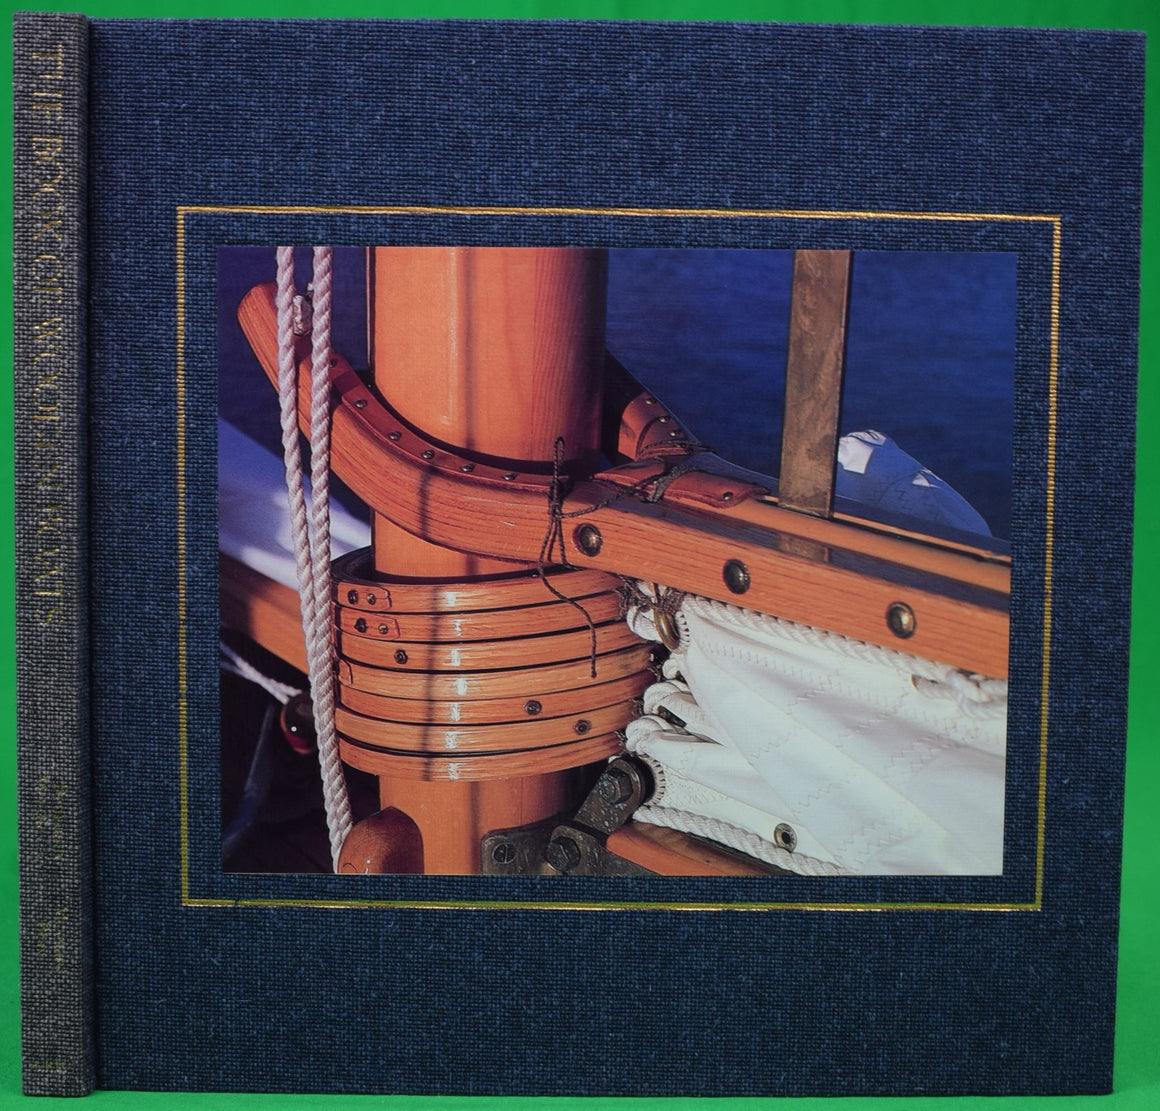 "The Book Of Wooden Boats" 1992 BRAY, Maynard [text by] (SOLD)